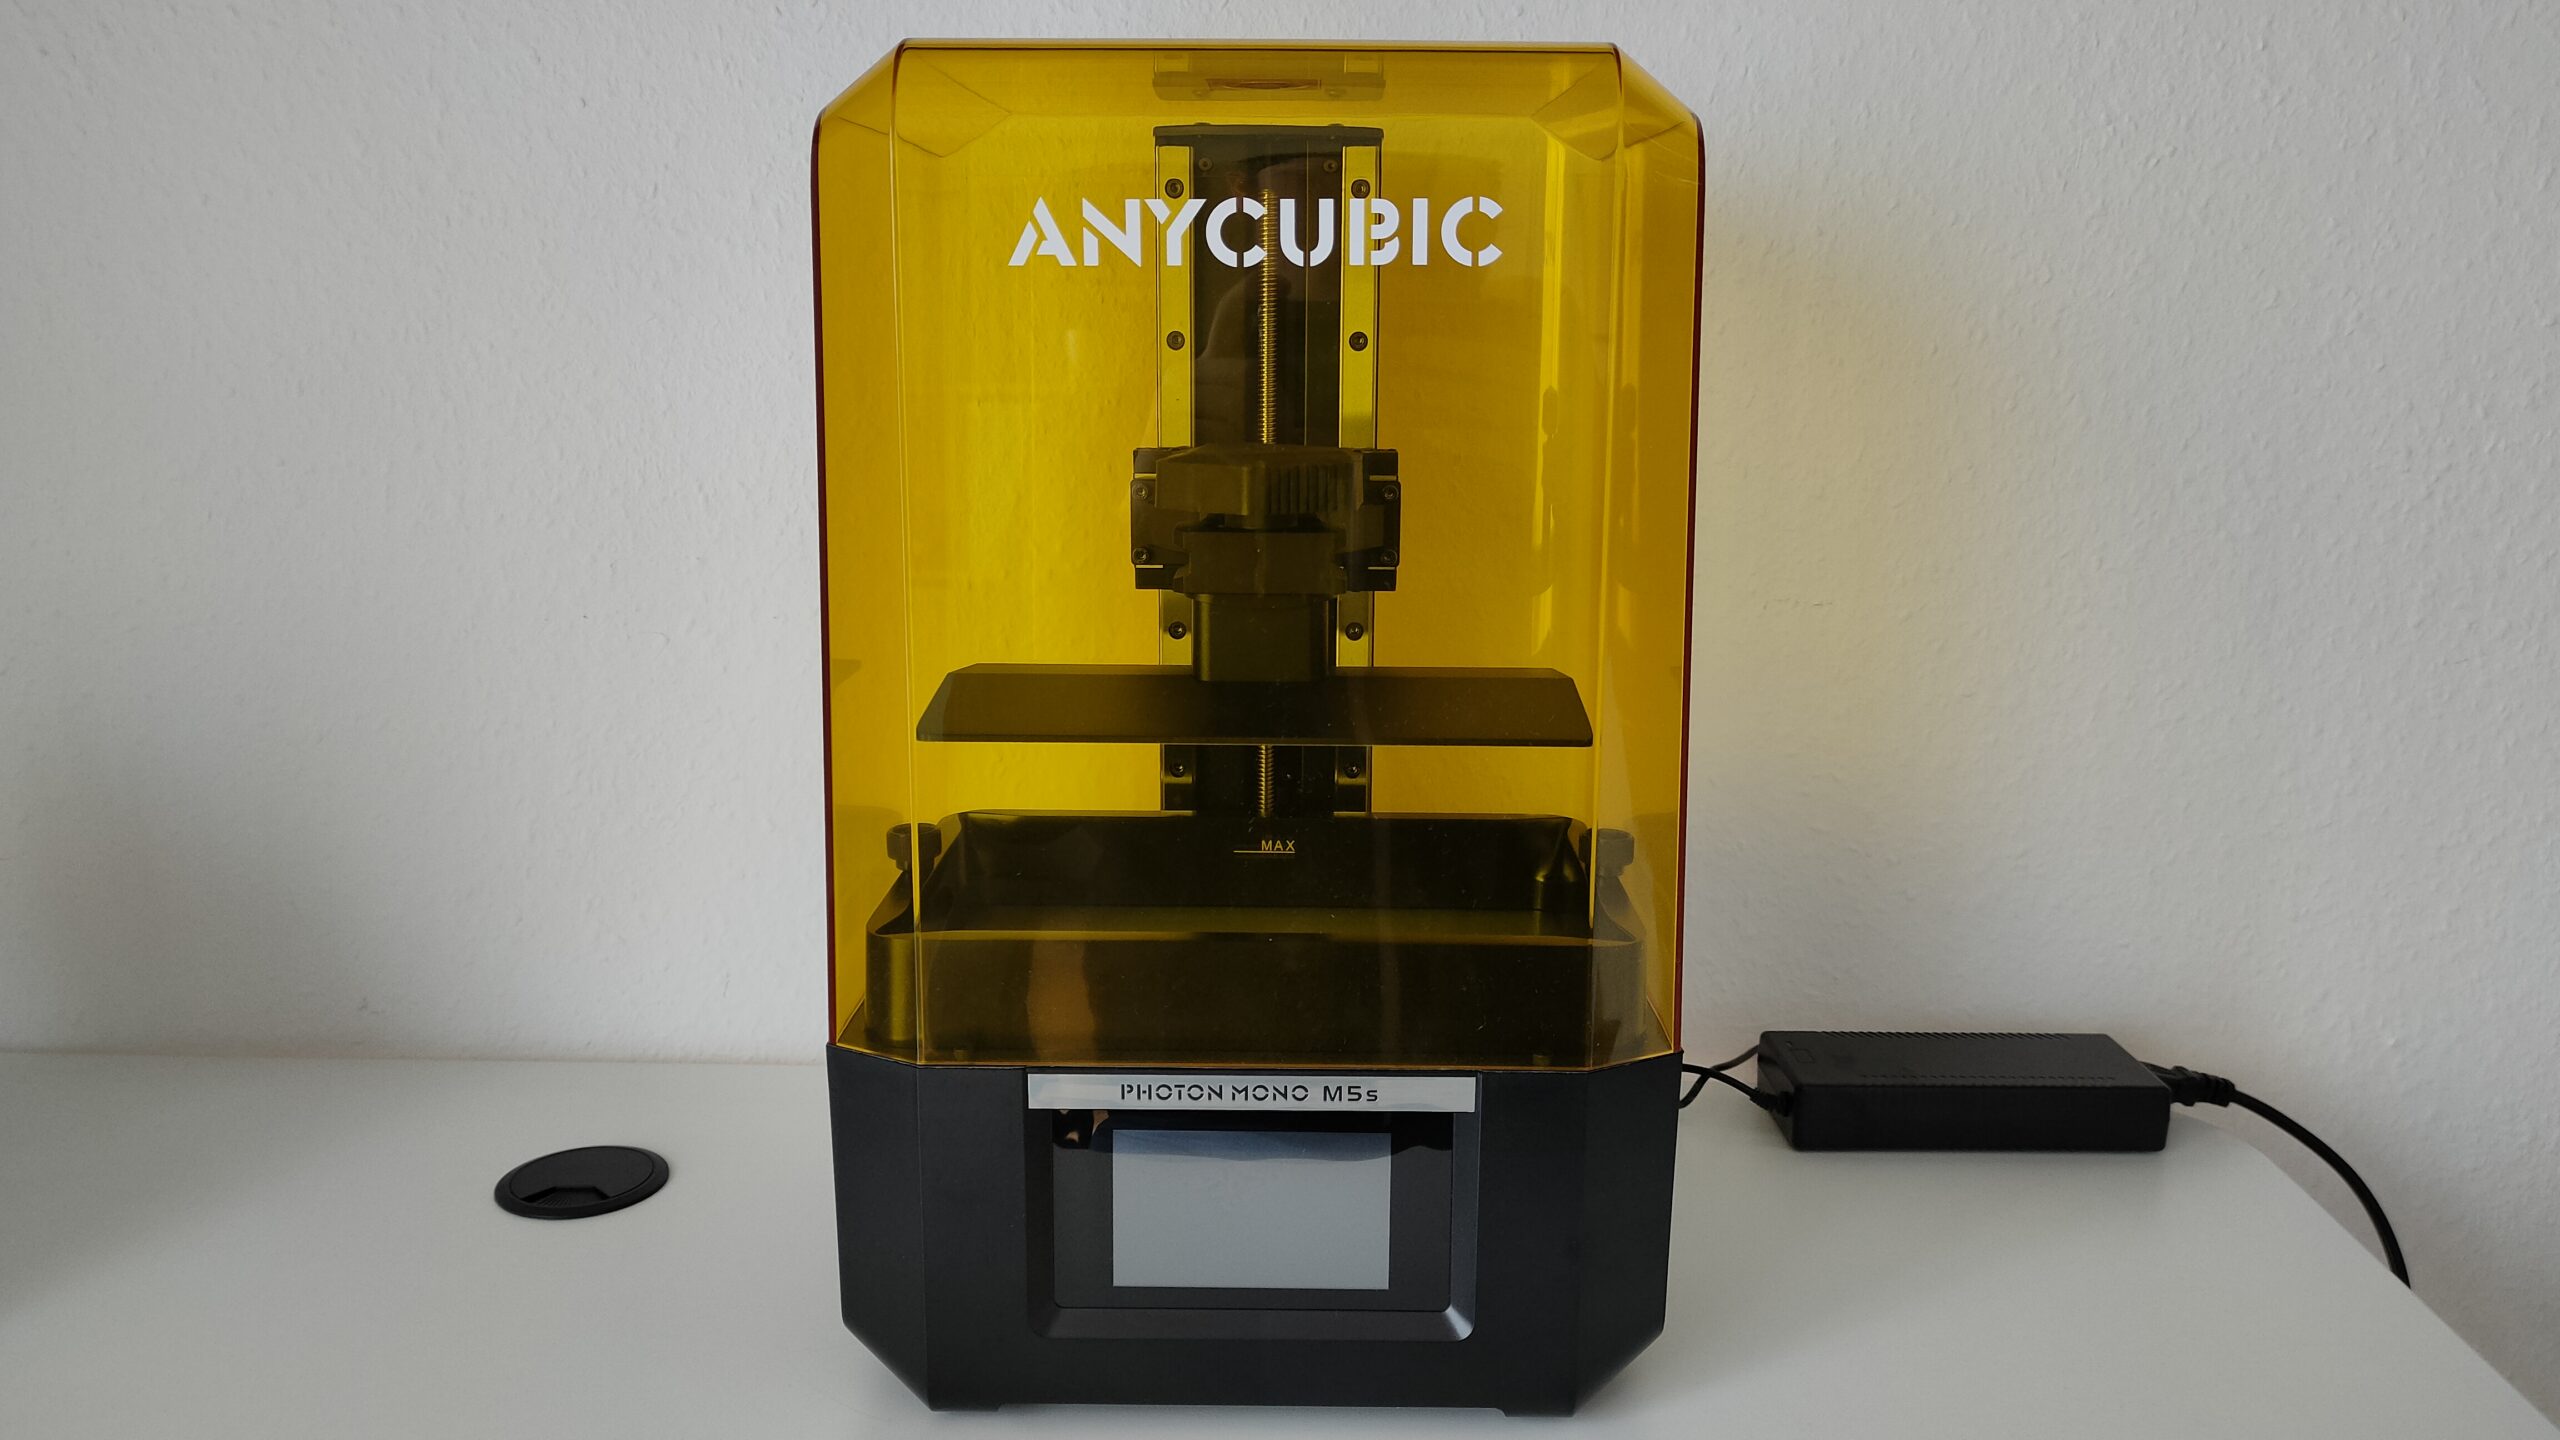 ANYCUBIC Photon Mono M5, 12K Resin 3D Printer with 10.1'' HD